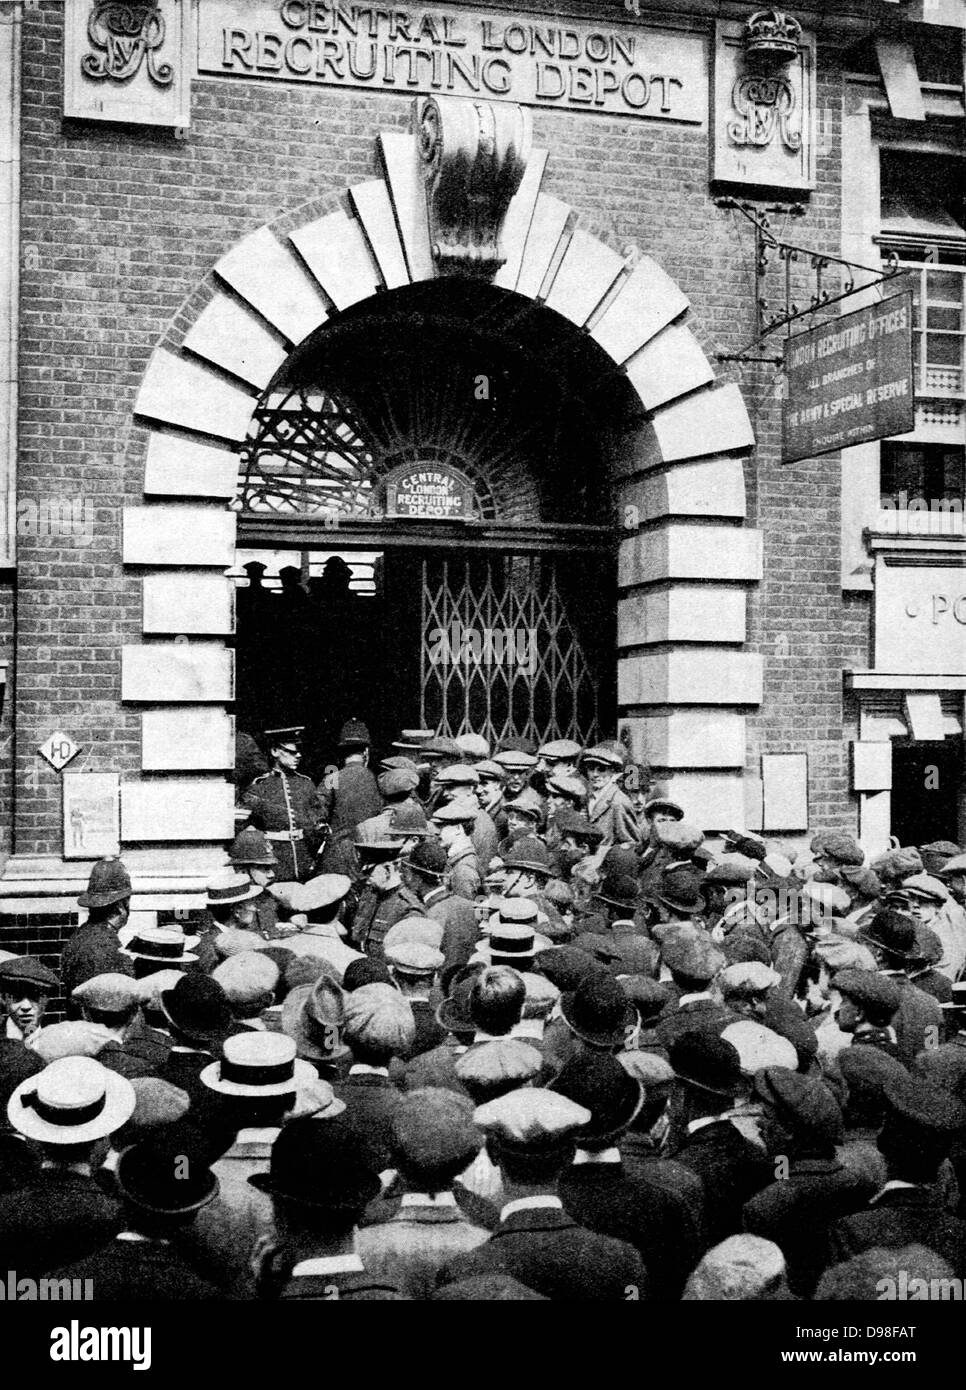 Central London Recruiting station for volunteers to join the army in the First World War Stock Photo